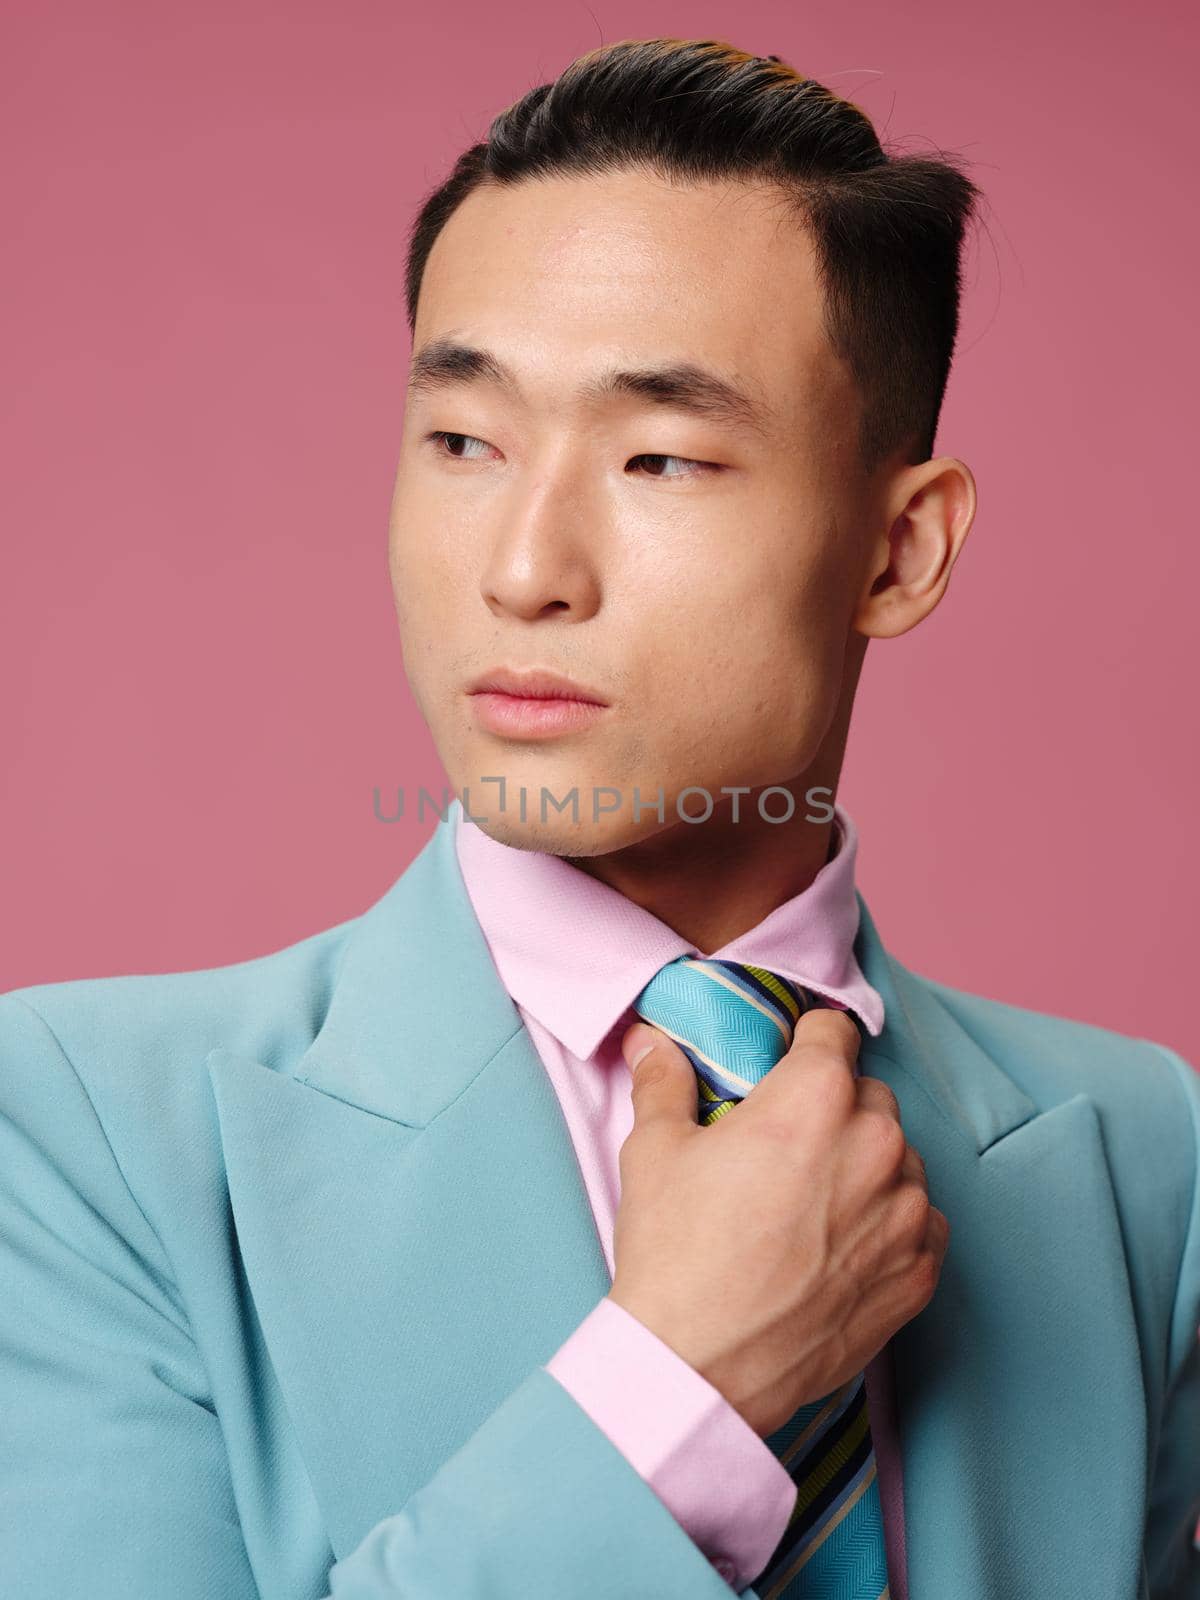 Man Asian appearance blue suit tie self-confidence businesswoman pink background by SHOTPRIME